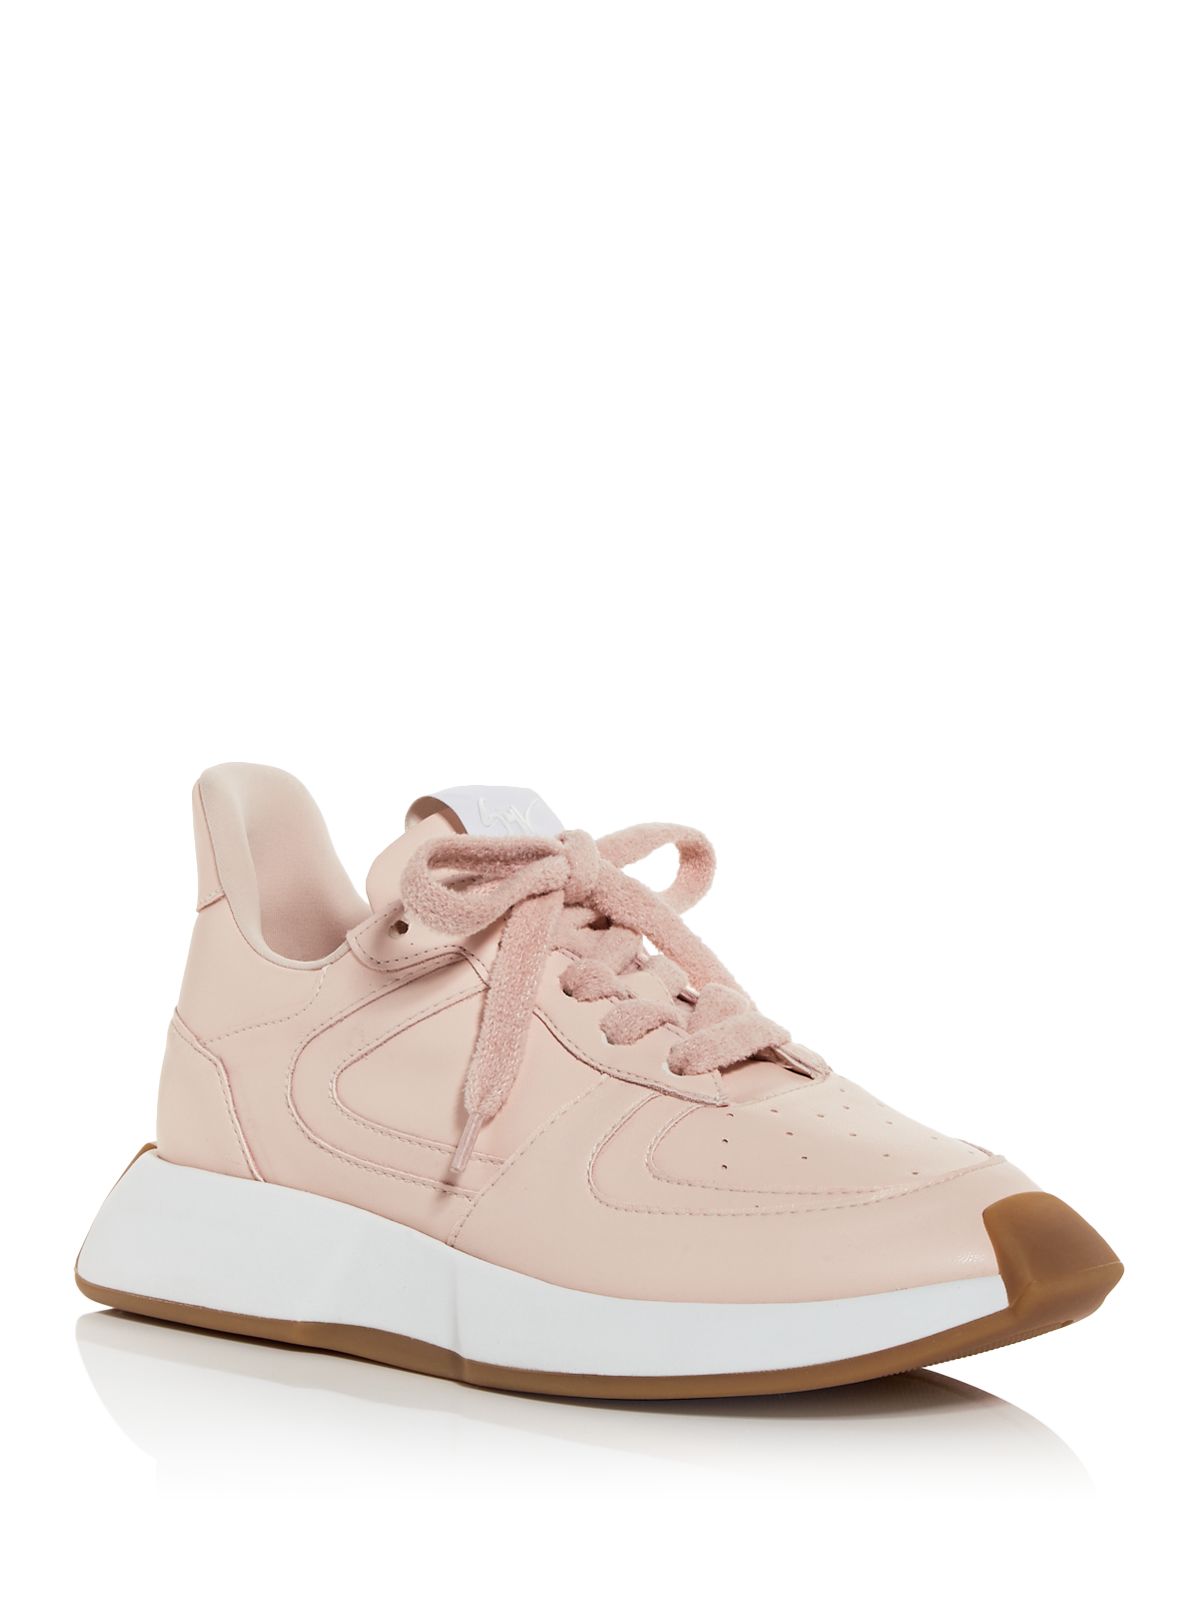 GIUSEPPE ZANOTTI Womens Pink Padded Tongue And Collar Rubber Bumper At Heel And Toe Padded Perforated Winner Almond Toe Wedge Lace-Up Sneakers Shoes 38.5